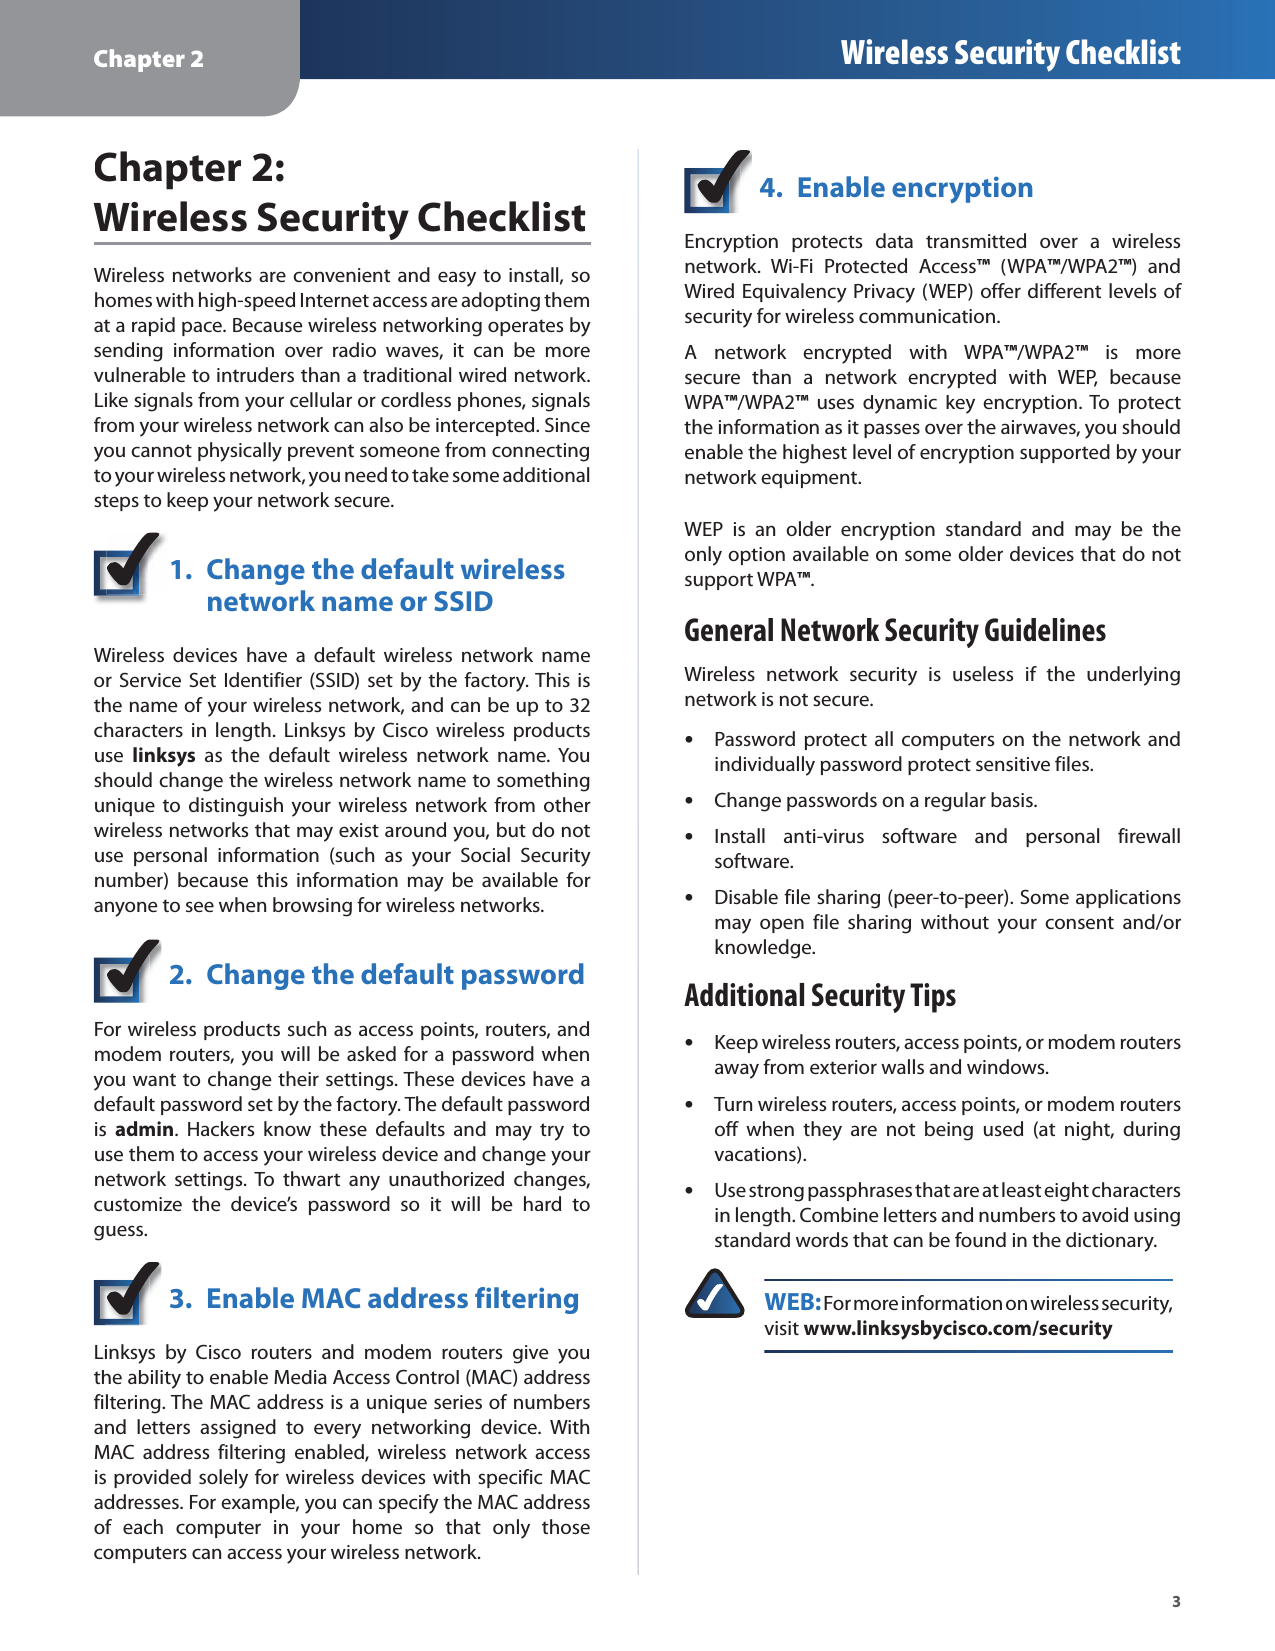 Chapter 2 Wireless Security Checklist3Chapter 2:  Wireless Security ChecklistWireless networks are convenient and easy to install, sohomes with high-speed Internet access are adopting themat a rapid pace. Because wireless networking operates bysending information over radio waves, it can be morevulnerable to intruders than a traditional wired network.Like signals from your cellular or cordless phones, signalsfrom your wireless network can also be intercepted. Sinceyou cannot physically prevent someone from connectingto your wireless network, you need to take some additionalsteps to keep your network secure.1. Change the default wireless network name or SSIDWireless devices have a default wireless network nameor Service Set Identifier (SSID) set by the factory. This isthe name of your wireless network, and can be up to 32characters in length. Linksys by Cisco wireless productsuselinksys as the default wireless network name. Youshould change the wireless network name to somethingunique to distinguish your wireless network from otherwireless networks that may exist around you, but do notuse personal information (such as your Social Securitynumber) because this information may be available foranyone to see when browsing for wireless networks.2. Change the default passwordFor wireless products such as access points, routers, andmodem routers, you will be asked for a password whenyou want to change their settings. These devices have adefault password set by the factory. The default passwordisadmin. Hackers know these defaults and may try touse them to access your wireless device and change yournetwork settings. To thwart any unauthorized changes,customize the device’s password so it will be hard toguess.3. Enable MAC address filteringLinksys by Cisco routers and modem routers give youthe ability to enable Media Access Control (MAC) addressfiltering. The MAC address is a unique series of numbersand letters assigned to every networking device. WithMAC address filtering enabled, wireless network accessis provided solely for wireless devices with specific MACaddresses. For example, you can specify the MAC addressof each computer in your home so that only thosecomputers can access your wireless network.4. Enable encryptionEncryption protects data transmitted over a wirelessnetwork. Wi-Fi Protected Access™ (WPA™/WPA2™) and Wired Equivalency Privacy (WEP) offer different levels of security for wireless communication.A network encrypted with WPA™/WPA2™ is more secure than a network encrypted with WEP, because WPA™/WPA2™ uses dynamic key encryption. To protectthe information as it passes over the airwaves, you shouldenable the highest level of encryption supported by yournetwork equipment.WEP is an older encryption standard and may be theonly option available on some older devices that do notsupport WPA™.General Network Security GuidelinesWireless network security is useless if the underlyingnetwork is not secure.sPassword protect all computers on the network andindividually password protect sensitive files.sChange passwords on a regular basis.sInstall anti-virus software and personal firewallsoftware.sDisable file sharing (peer-to-peer). Some applicationsmay open file sharing without your consent and/orknowledge.Additional Security TipssKeep wireless routers, access points, or modem routersaway from exterior walls and windows.sTurn wireless routers, access points, or modem routersoff when they are not being used (at night, duringvacations).sUse strong passphrases that are at least eight charactersin length. Combine letters and numbers to avoid usingstandard words that can be found in the dictionary.WEB: For more information on wireless security,visitwww.linksysbycisco.com/security